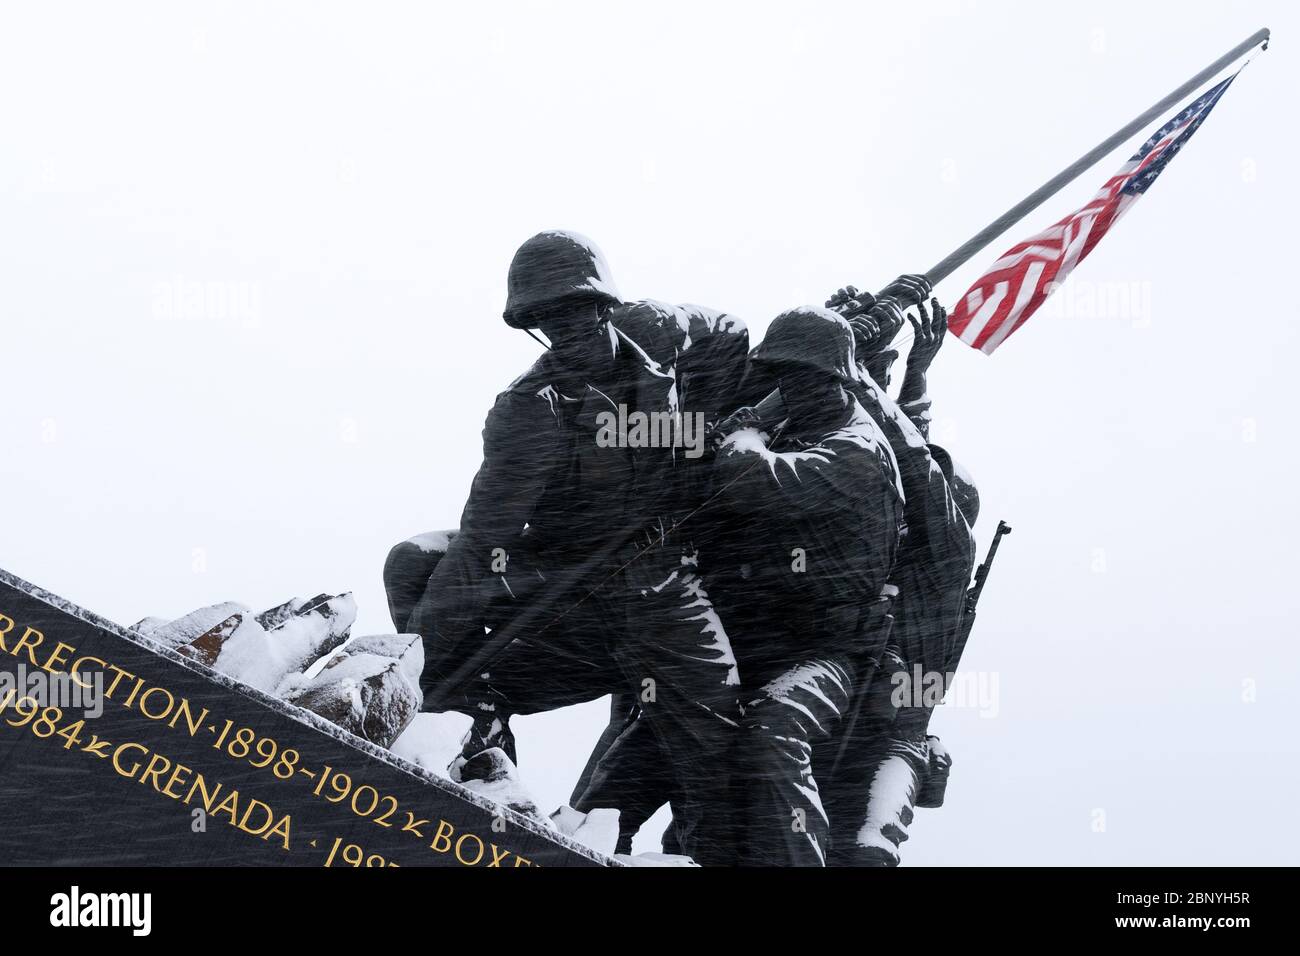 Iwo Jima Memorial Statue Dramatic Angle in a Snow Storm Stock Photo